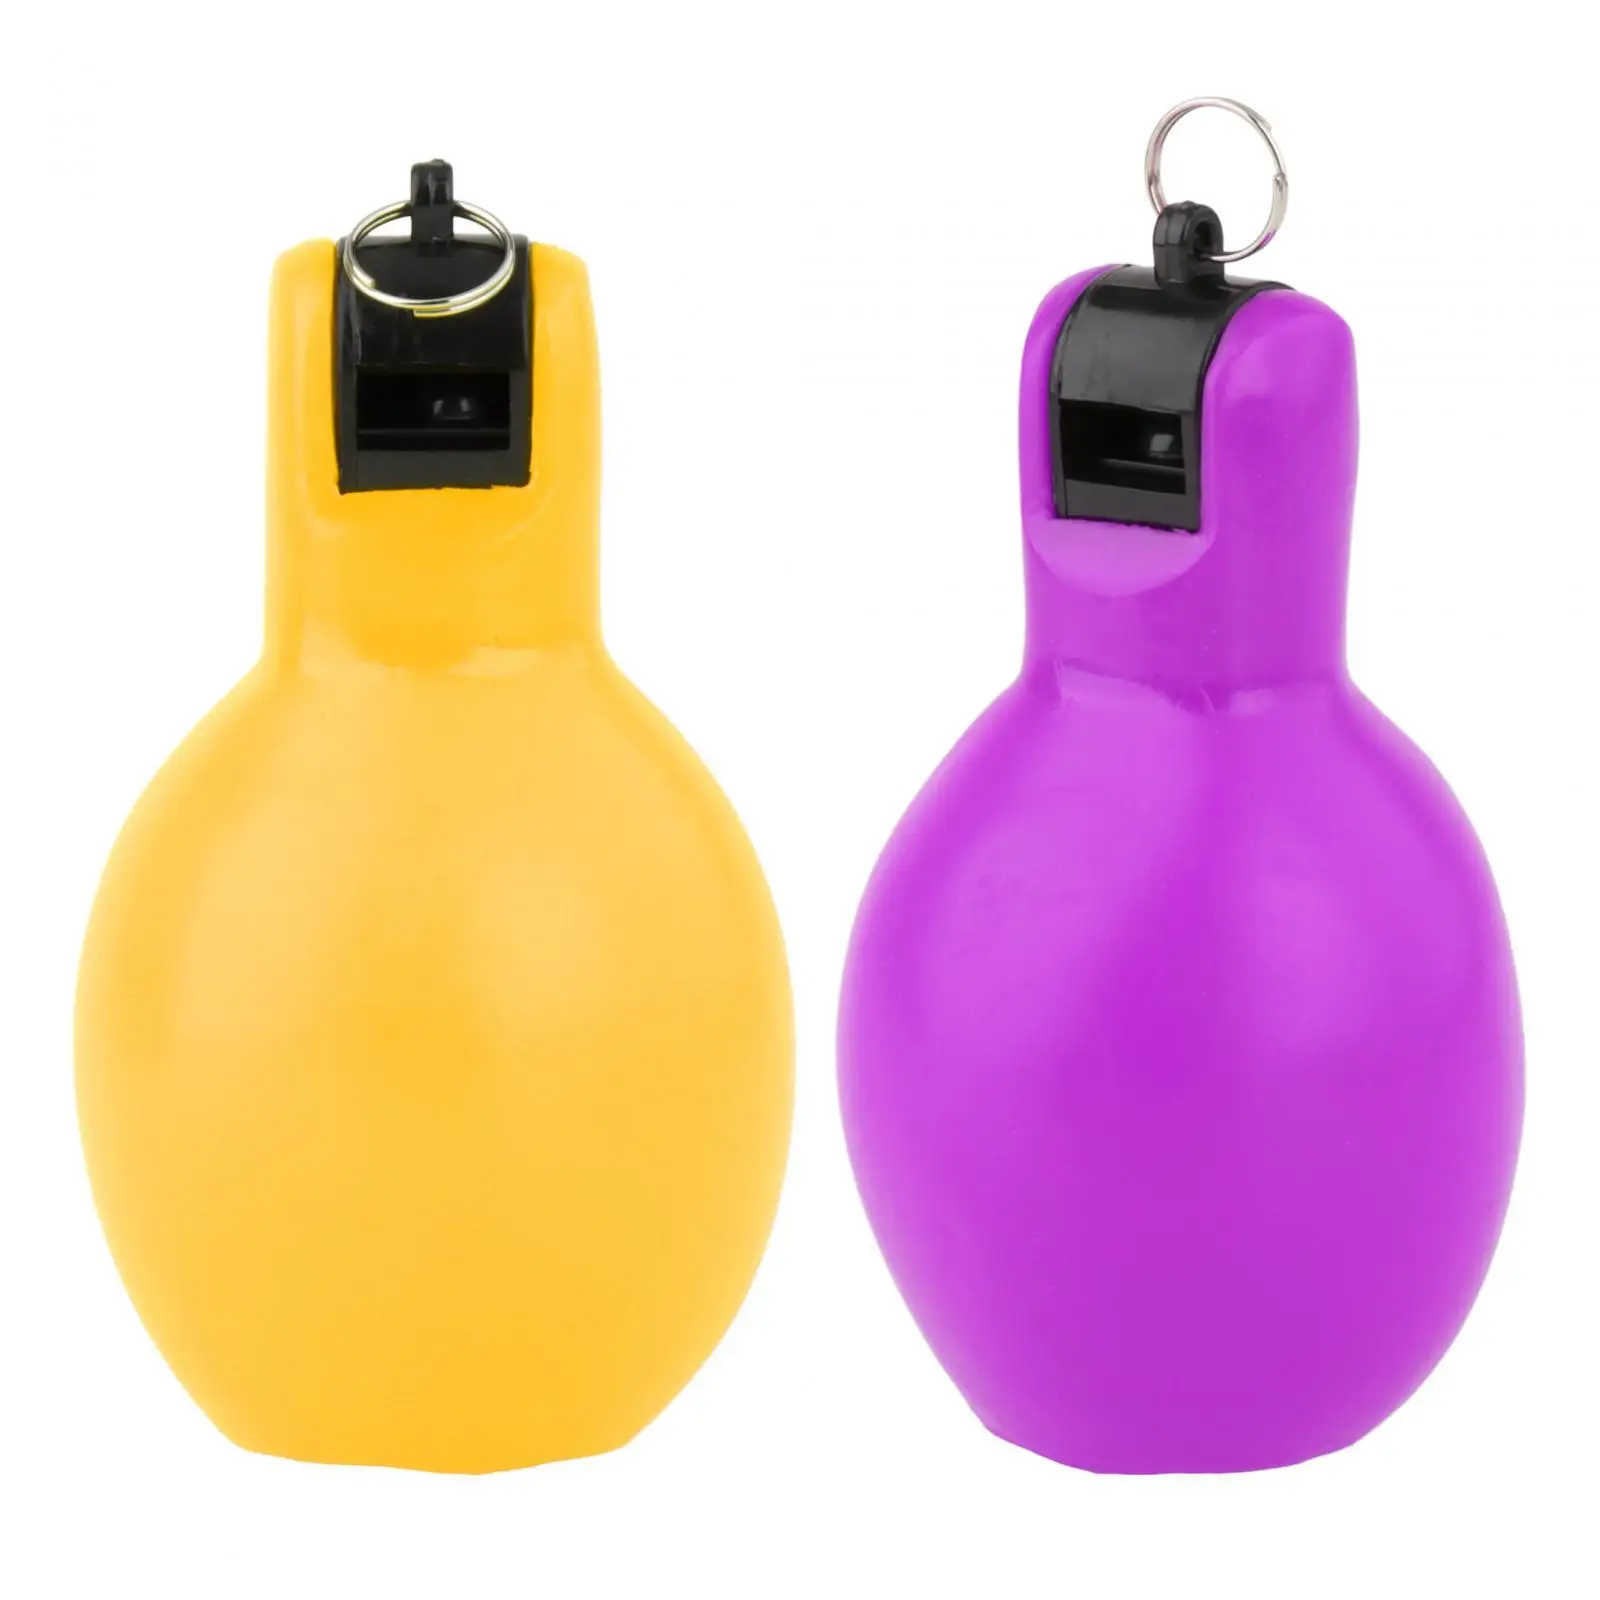 2 Pcs Hand Squeeze Whistles Coaches Whistle Soft PVC Handheld Sports Whistle